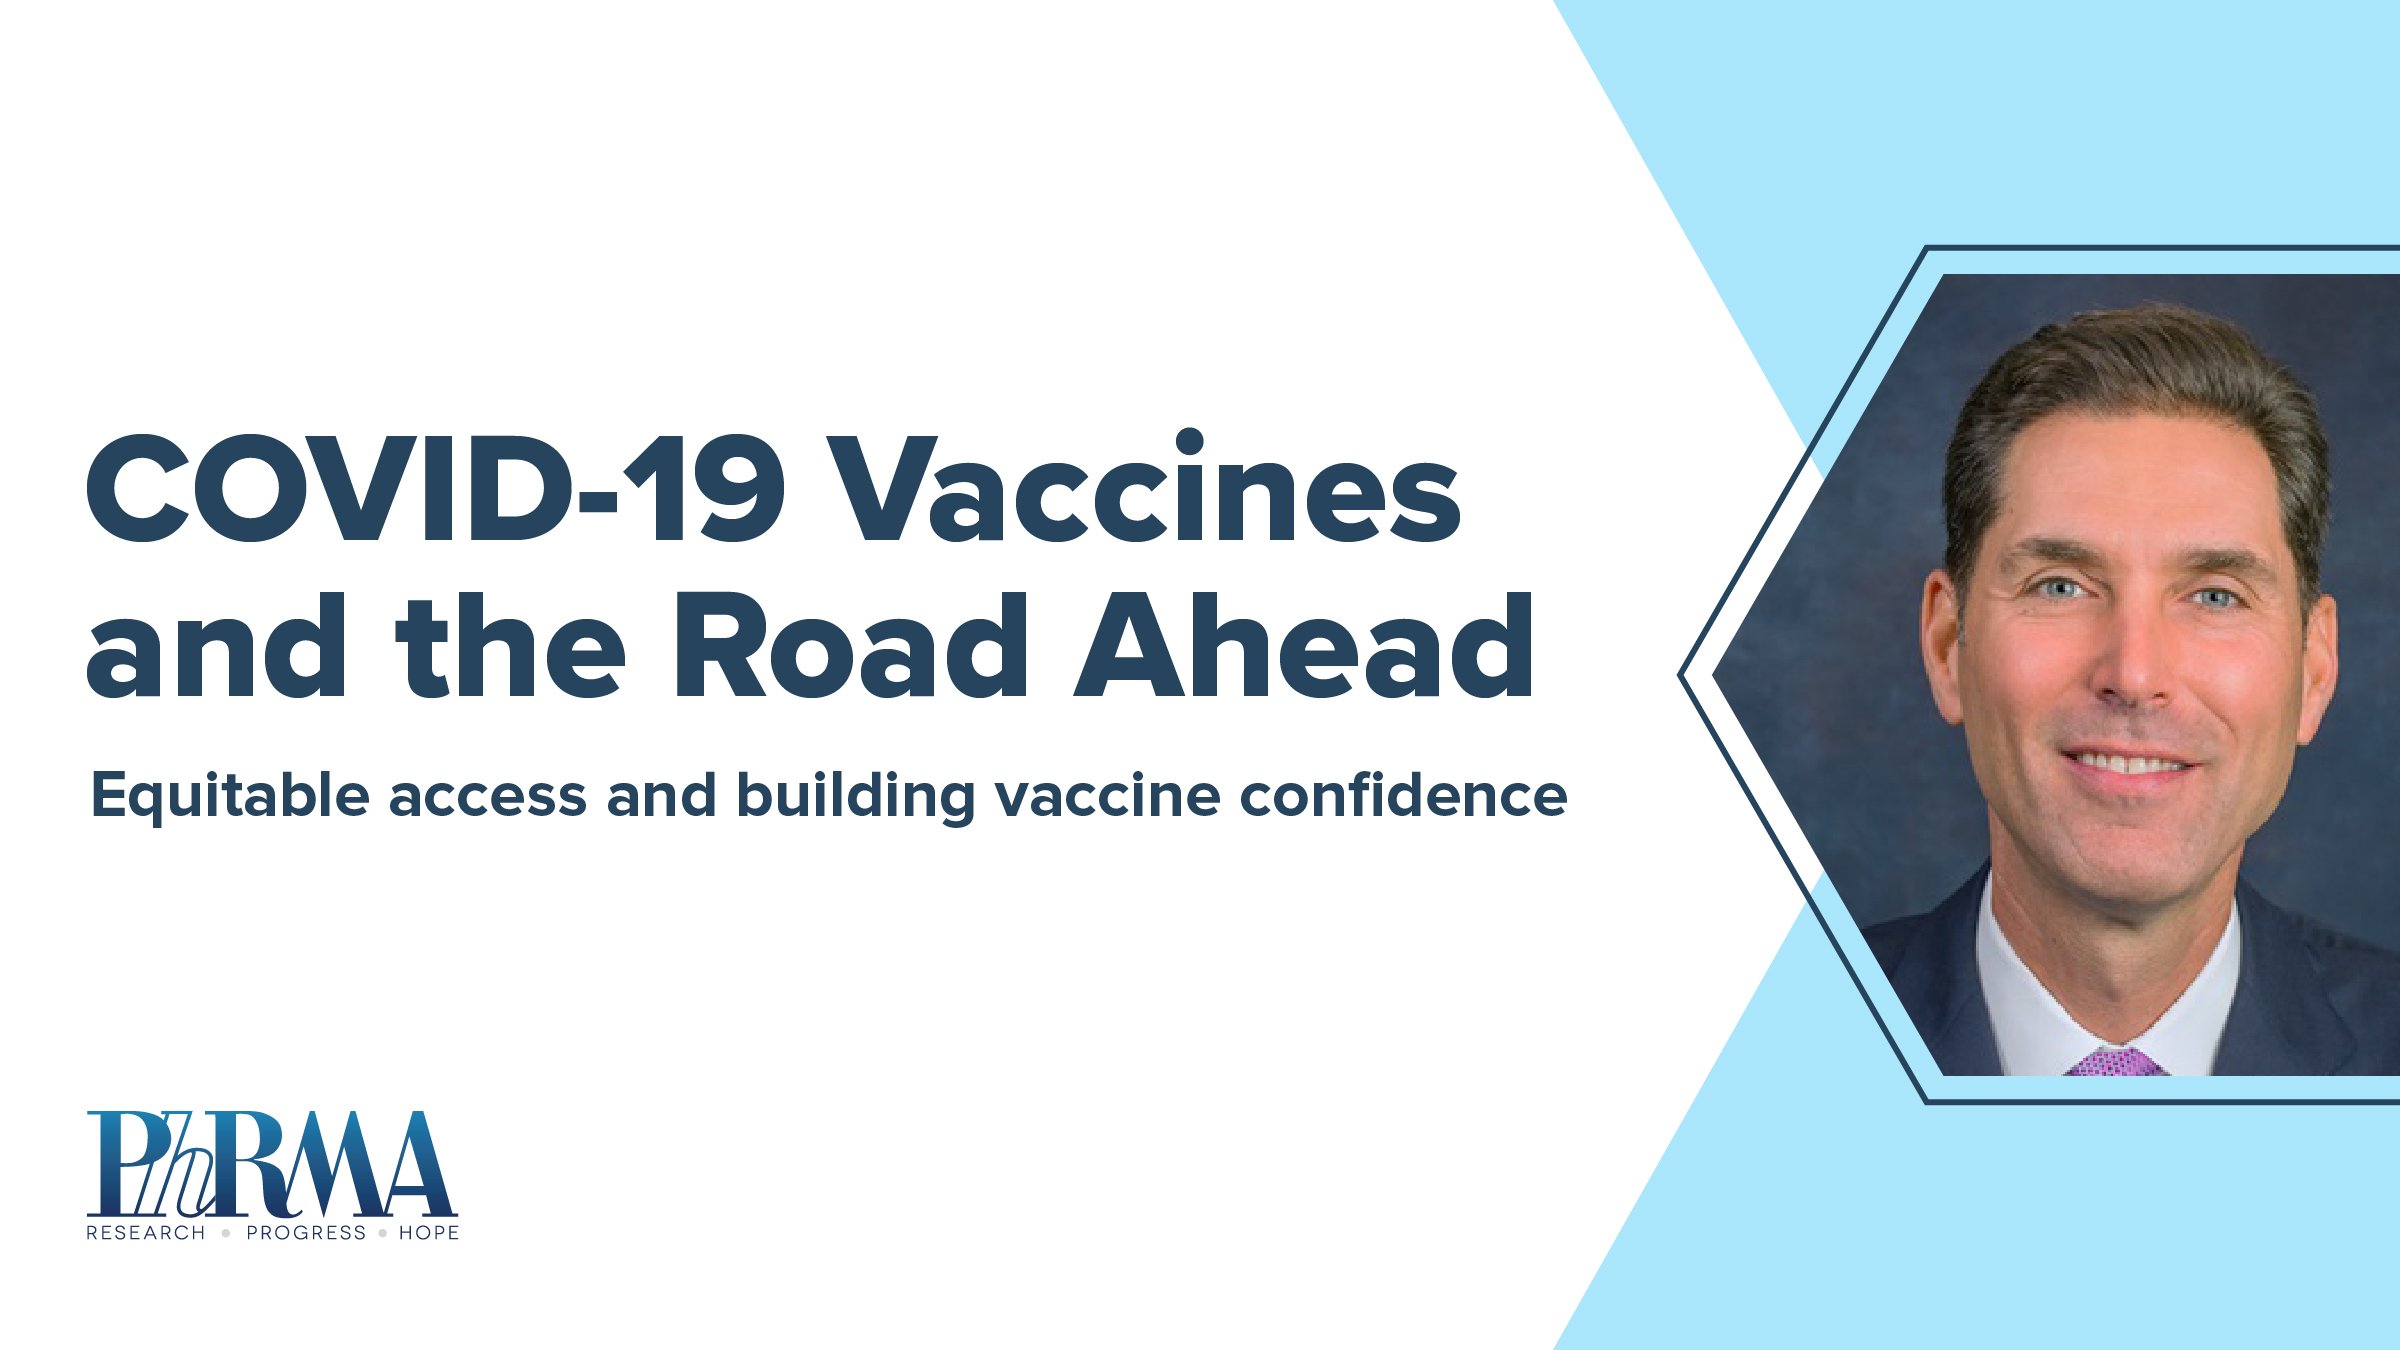 ICYMI: PhRMA president and CEO Stephen J. Ubl joins other industry leaders for a conversation on COVID-19 vaccines with Axios